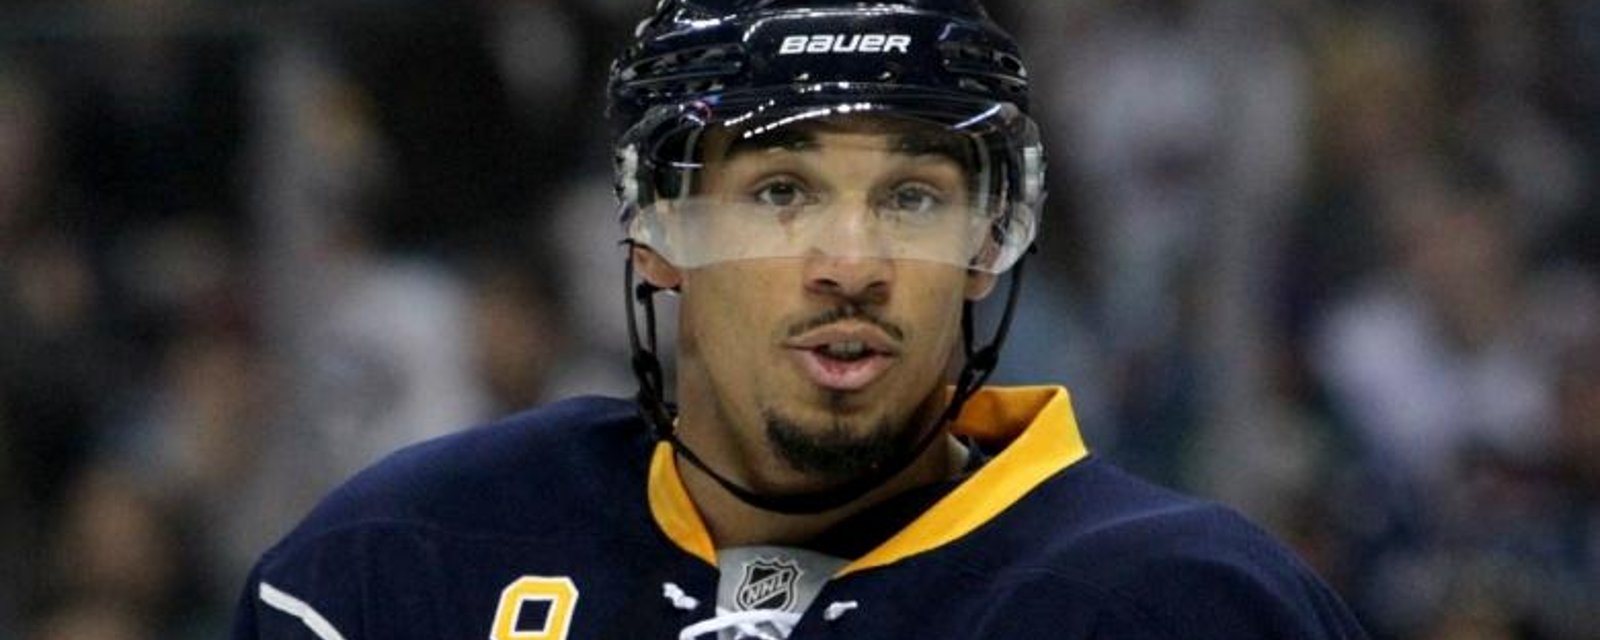 Evander Kane once again in trouble with his team.